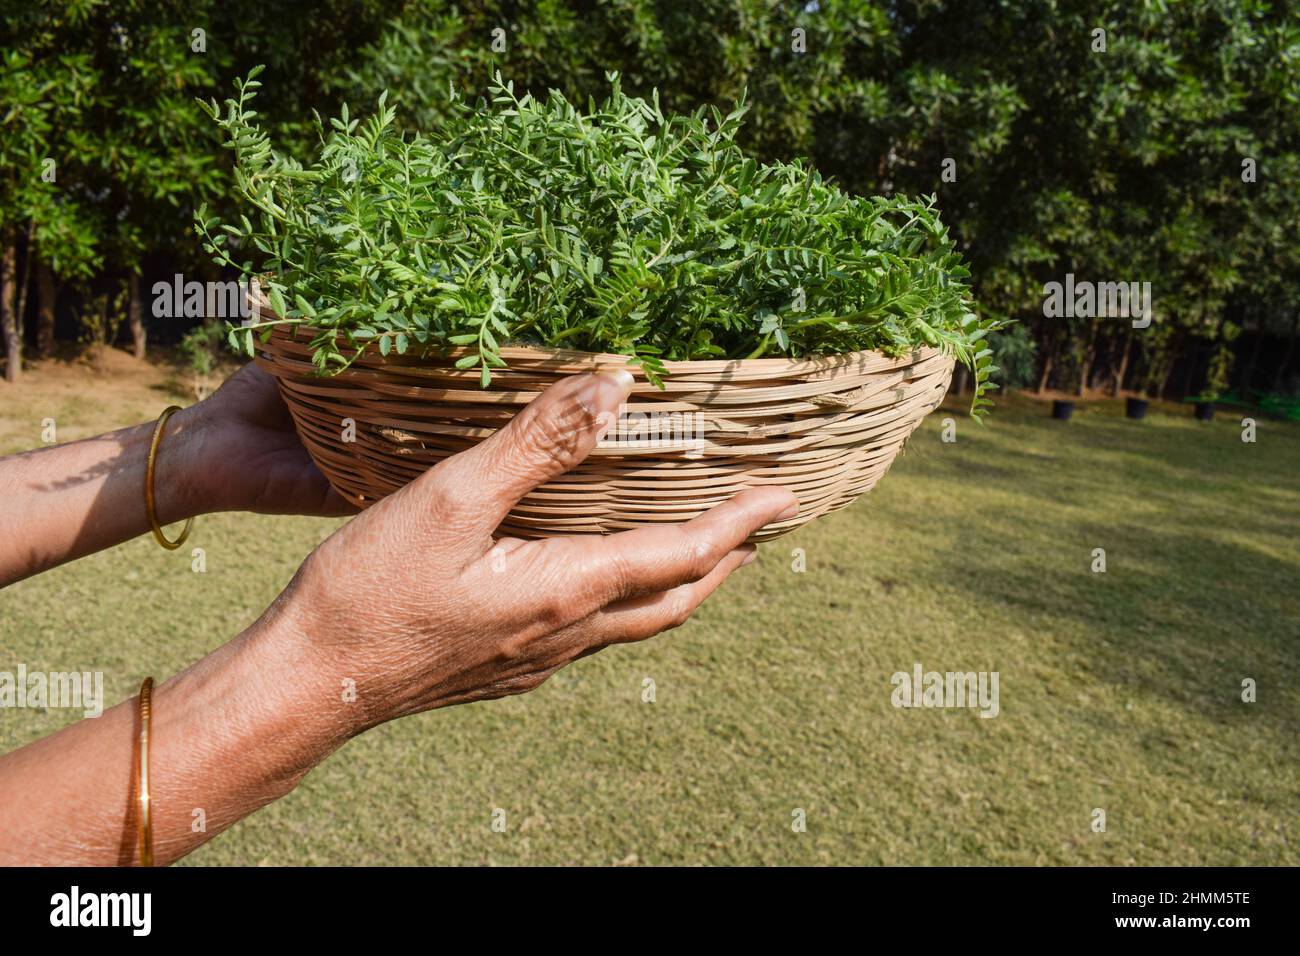 Female holding Green leafy Chickpea vegetable leaves. Tender chana chick pea or Bengal gram legume leaves in wicker bamboo basket sold in market outsi Stock Photo